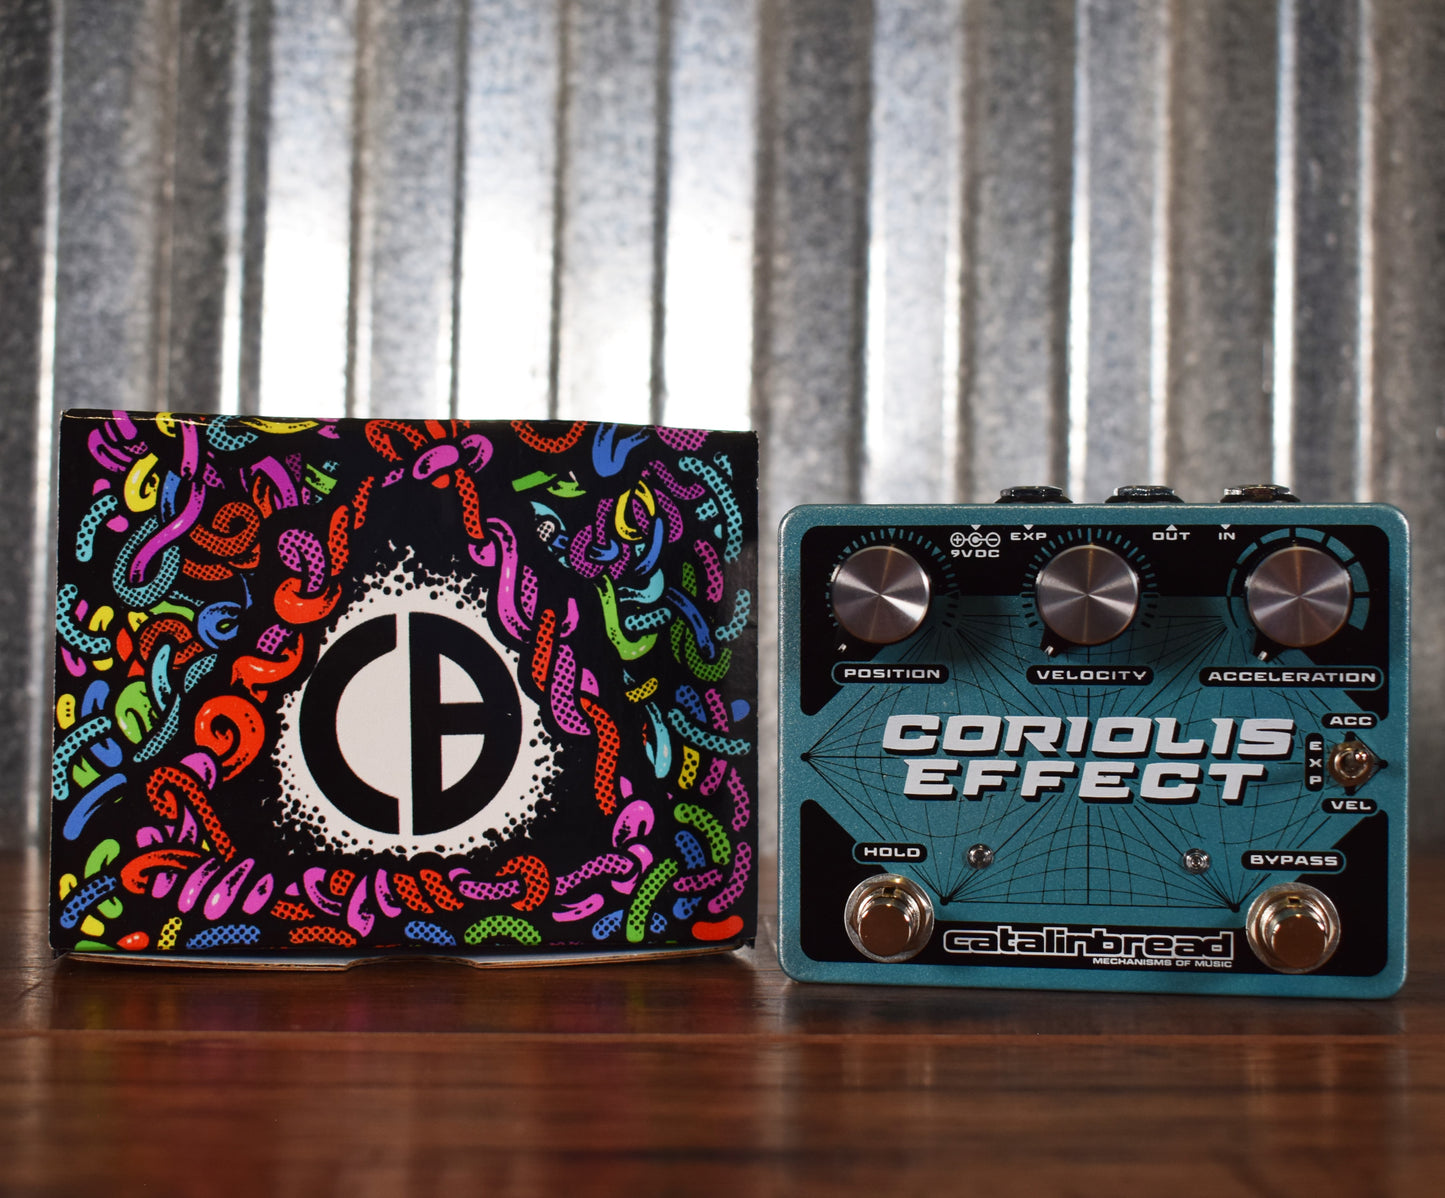 Catalinbread Coriolis Freeze Sustainer Wah Filter Pitch Shifter Harmonizer Guitar Effect Pedal Demo